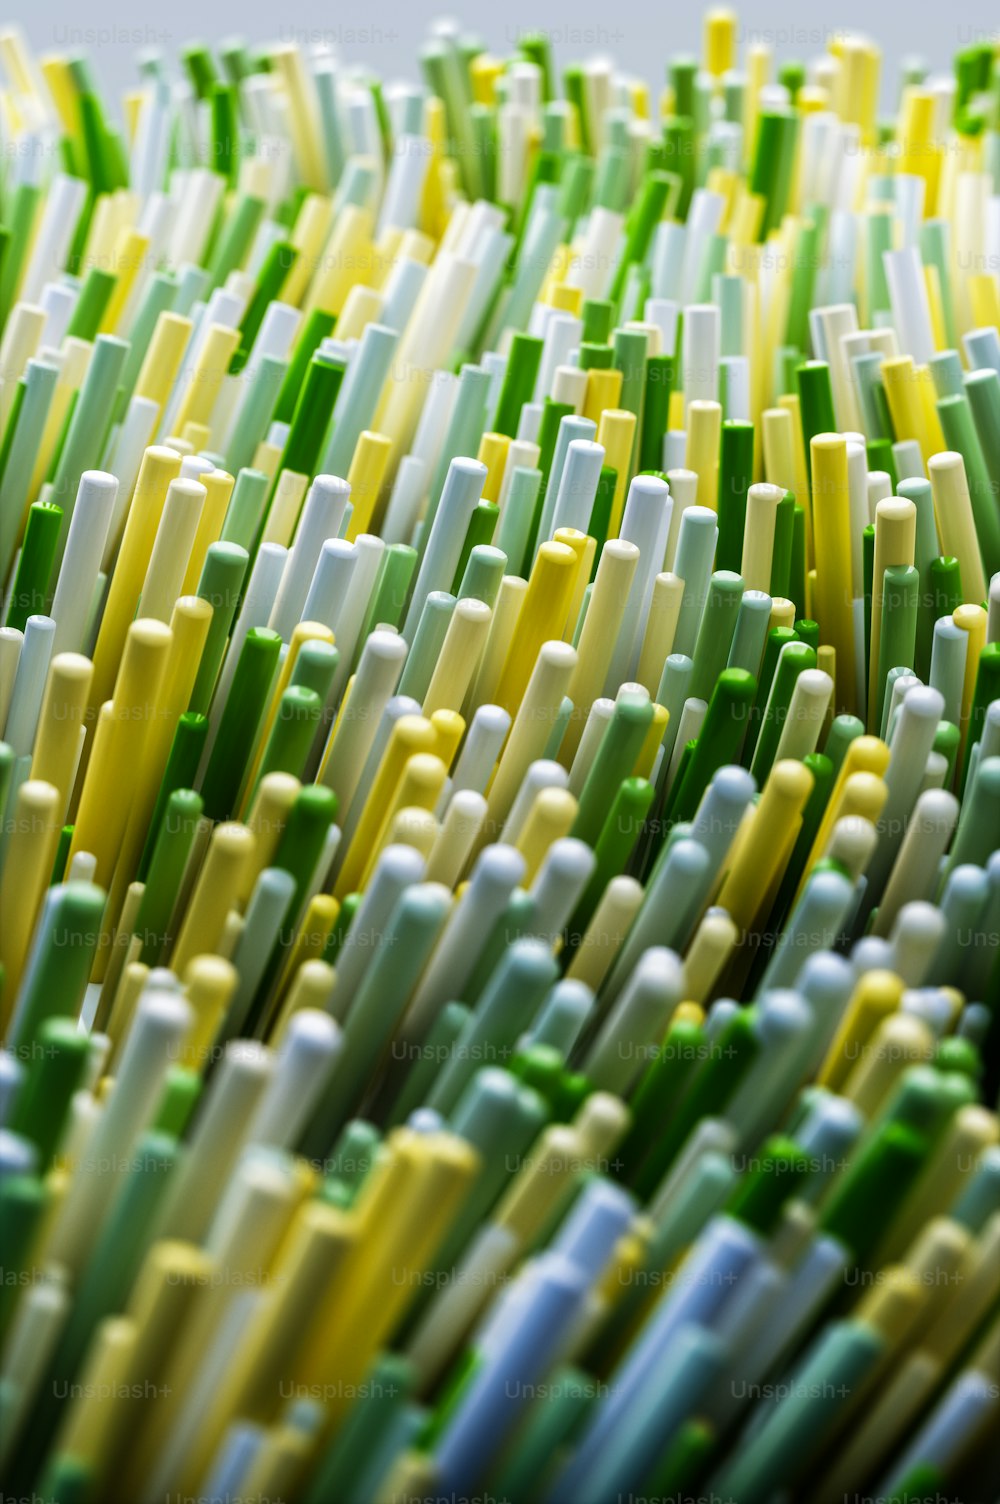 a close up of a bunch of green and yellow toothbrushes